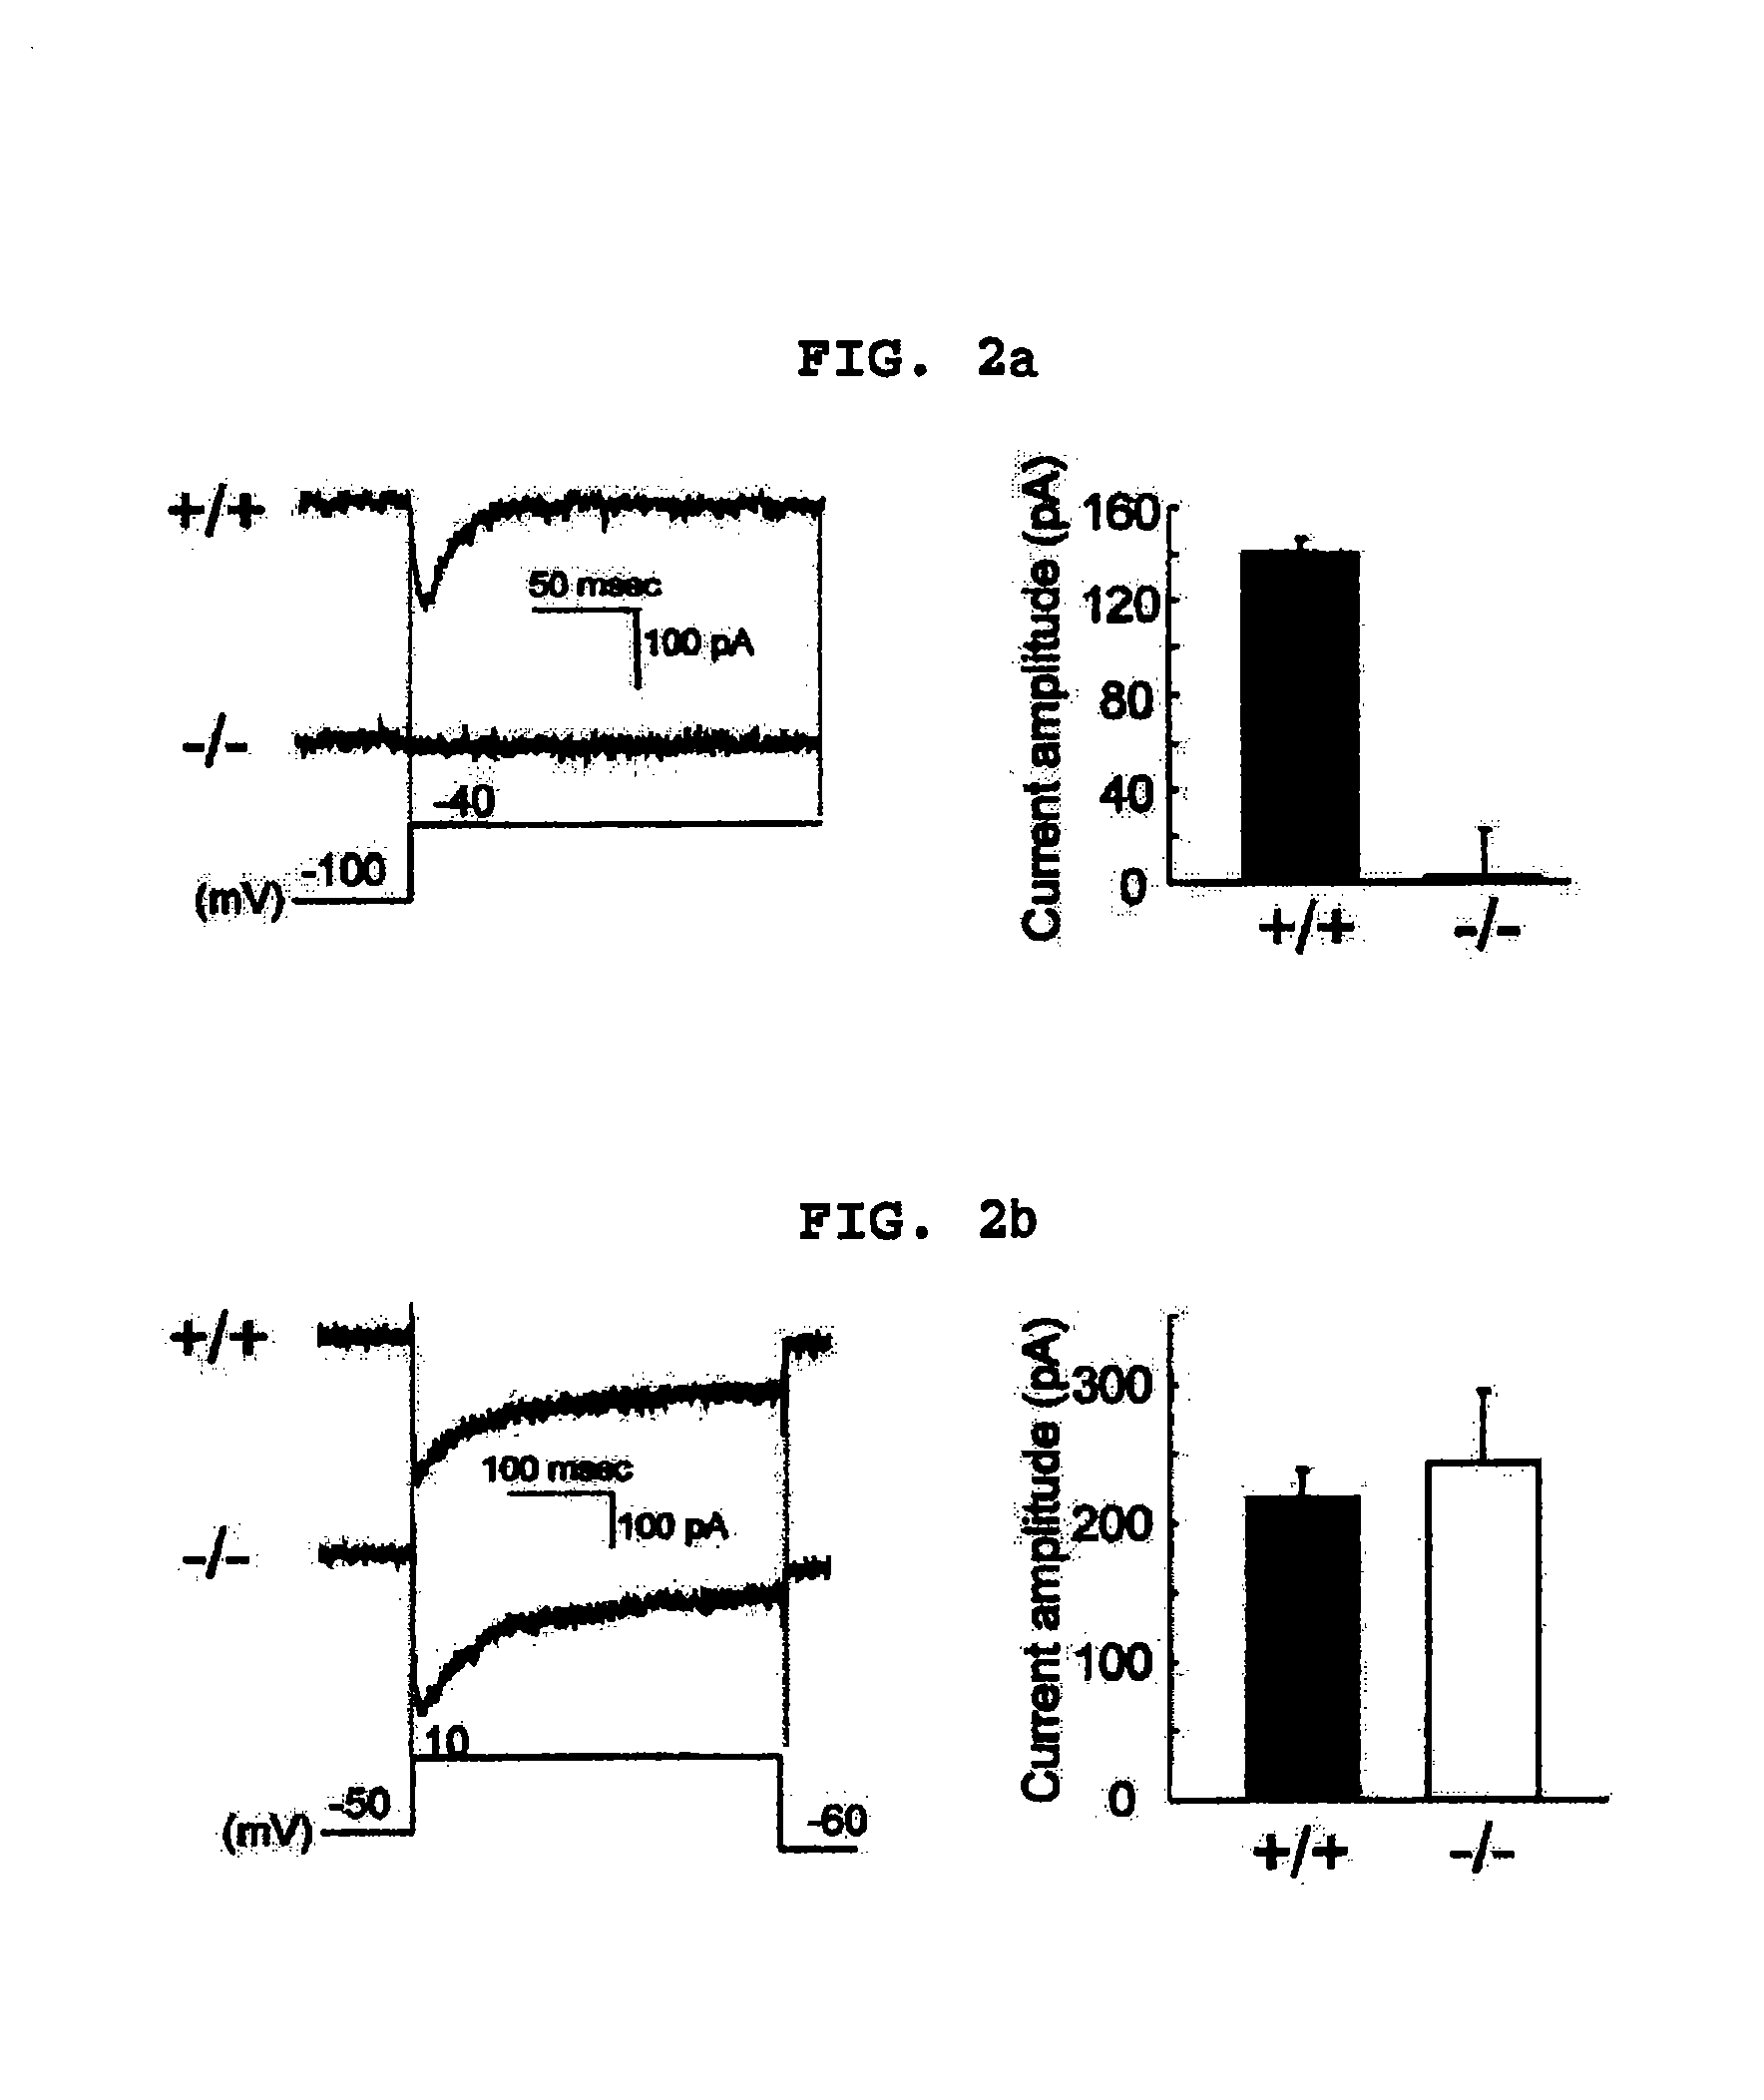 Transgenic mouse whose genome comprises a homozygous disruption of its α1G gene, a method of preparing the same and use thereof